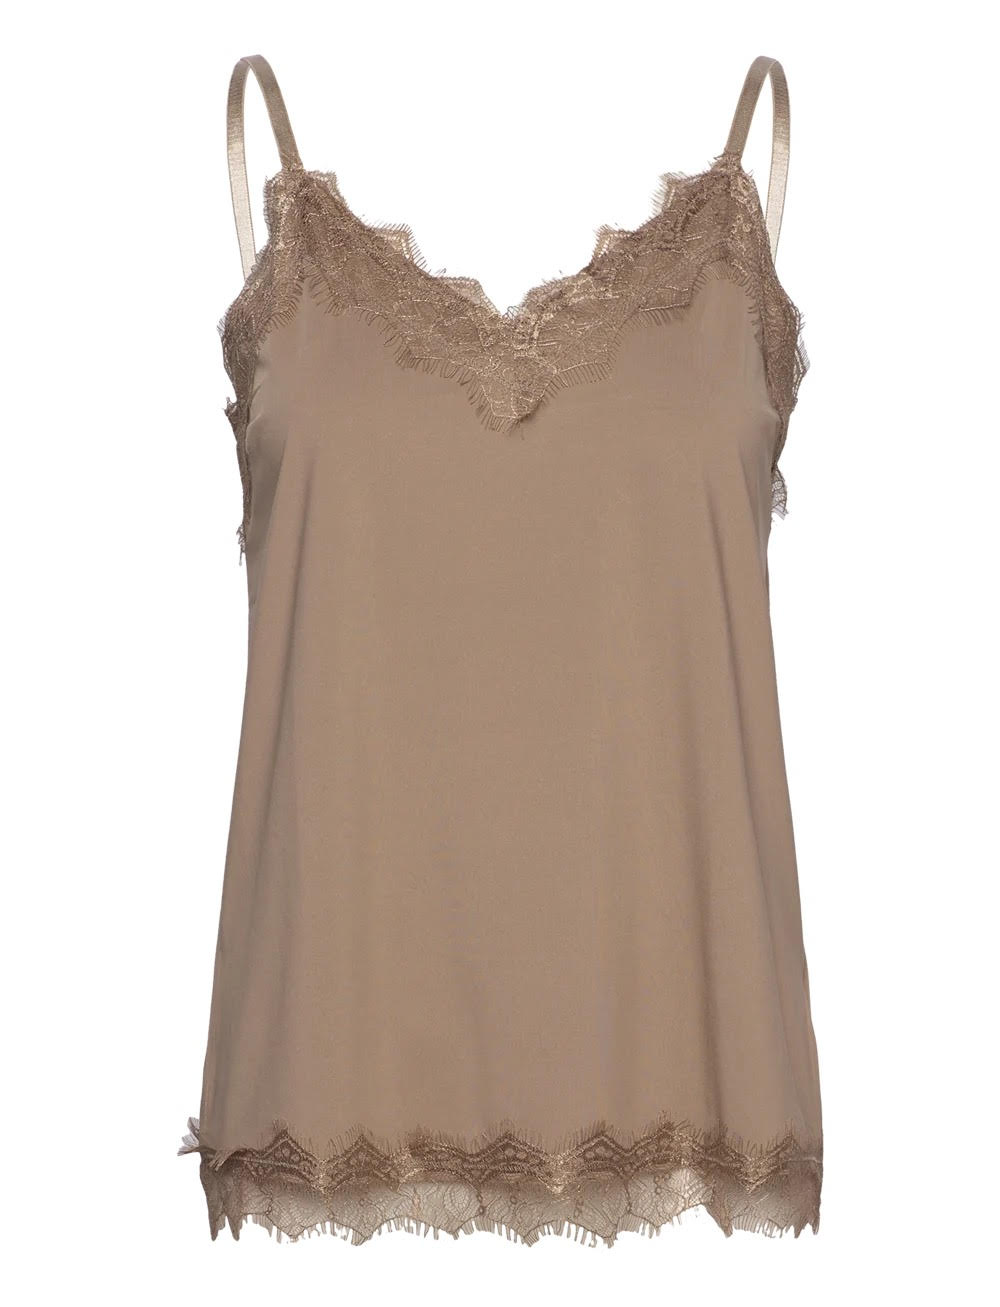 Fqbicco strap top desert taupe